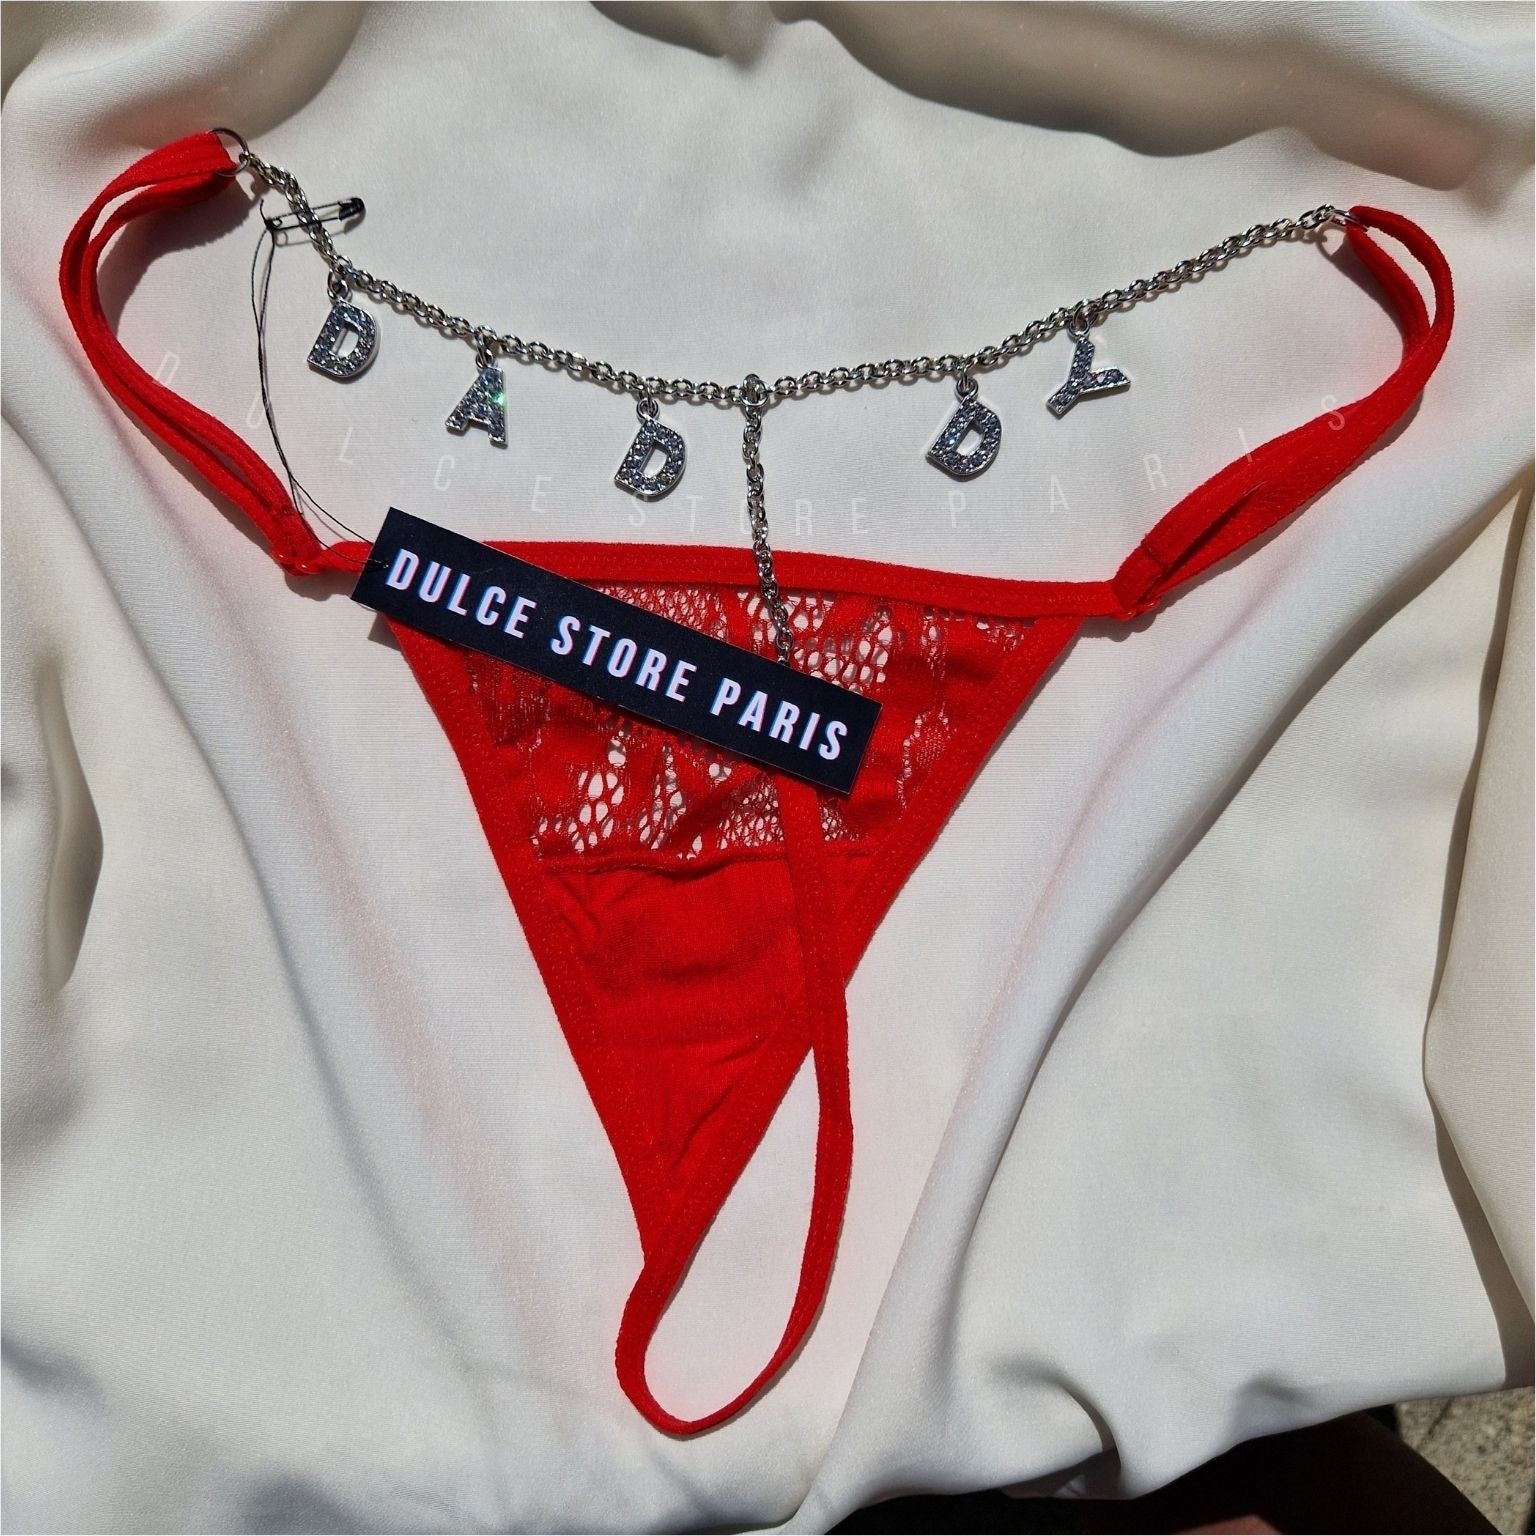 Custom Plus Size Thongs Customize Your Thongs With Your Favorite Naughty  Words Naughty Custom Thongs -  Canada